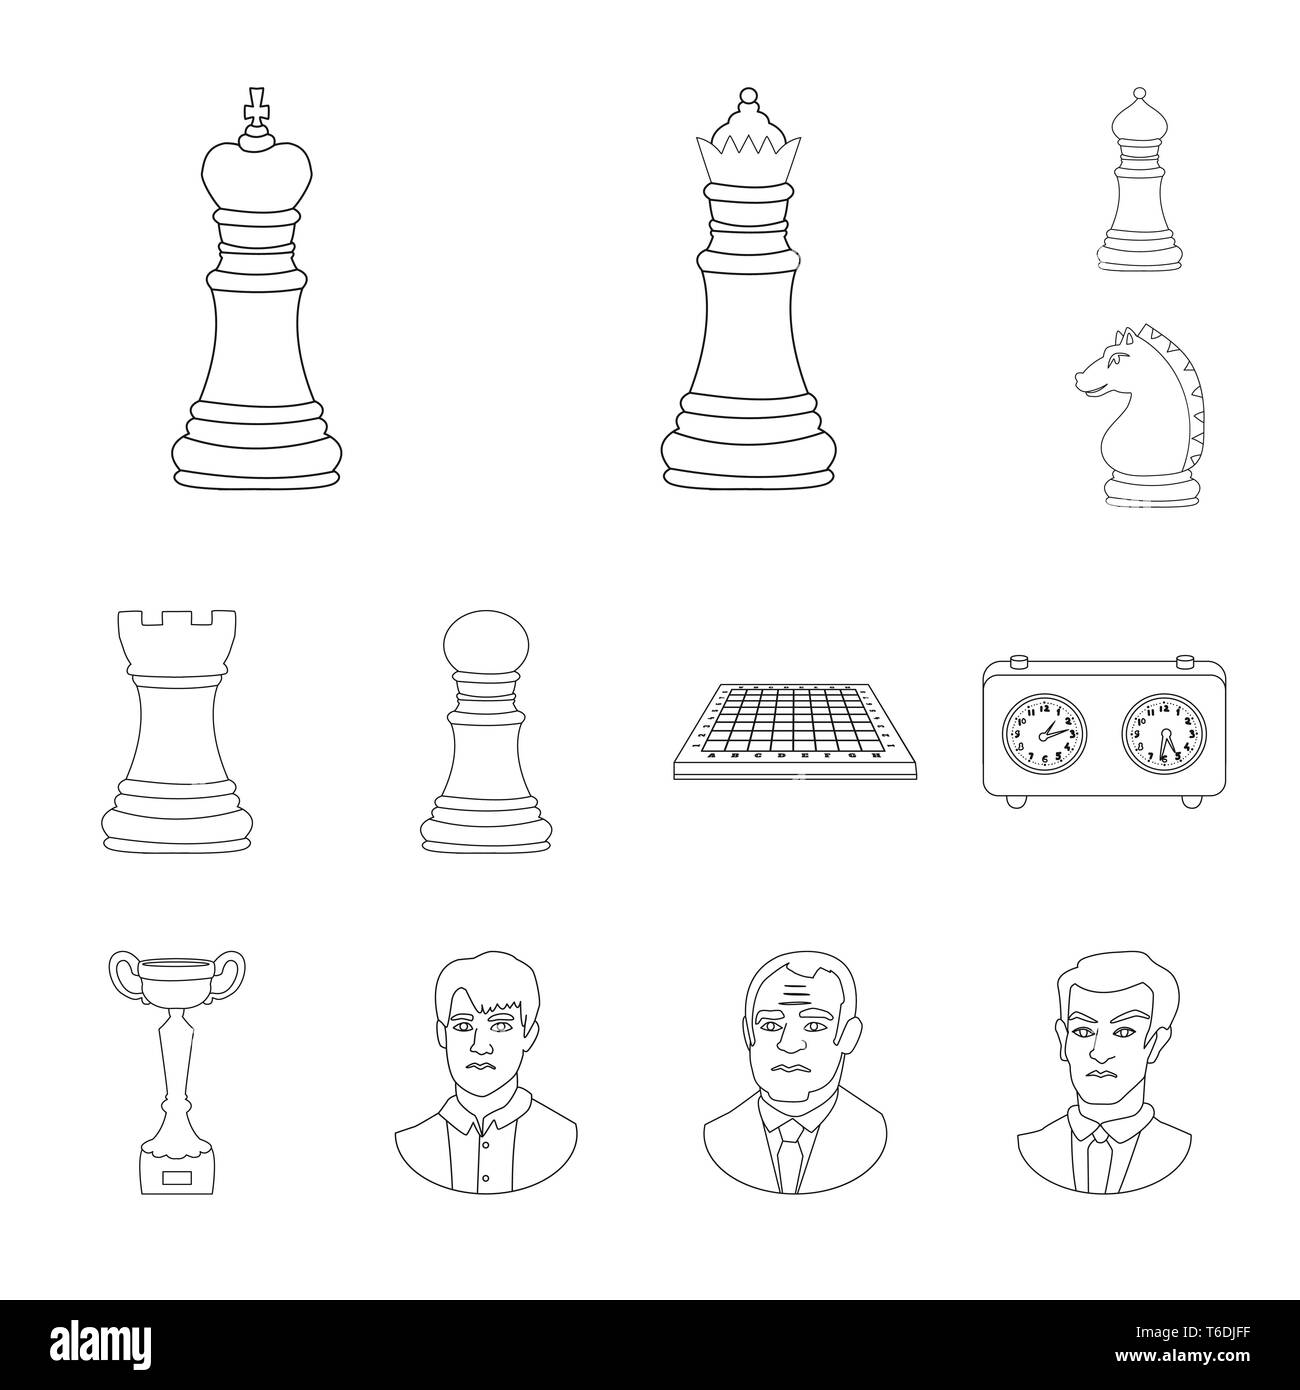 king,queen,bishop,knight,rook,pawn,chessboard,clock,cup,man,board,strategic,horse,black,timer,winner,face,businessman,leadership,check,head,network,counter,table,button,goblet,guy,portrait,piece,strategy,tactical,play,checkmate,thin,club,target,chess,game,set,vector,icon,illustration,isolated,collection,design,element,graphic,sign,outline,line Vector Vectors , Stock Vector